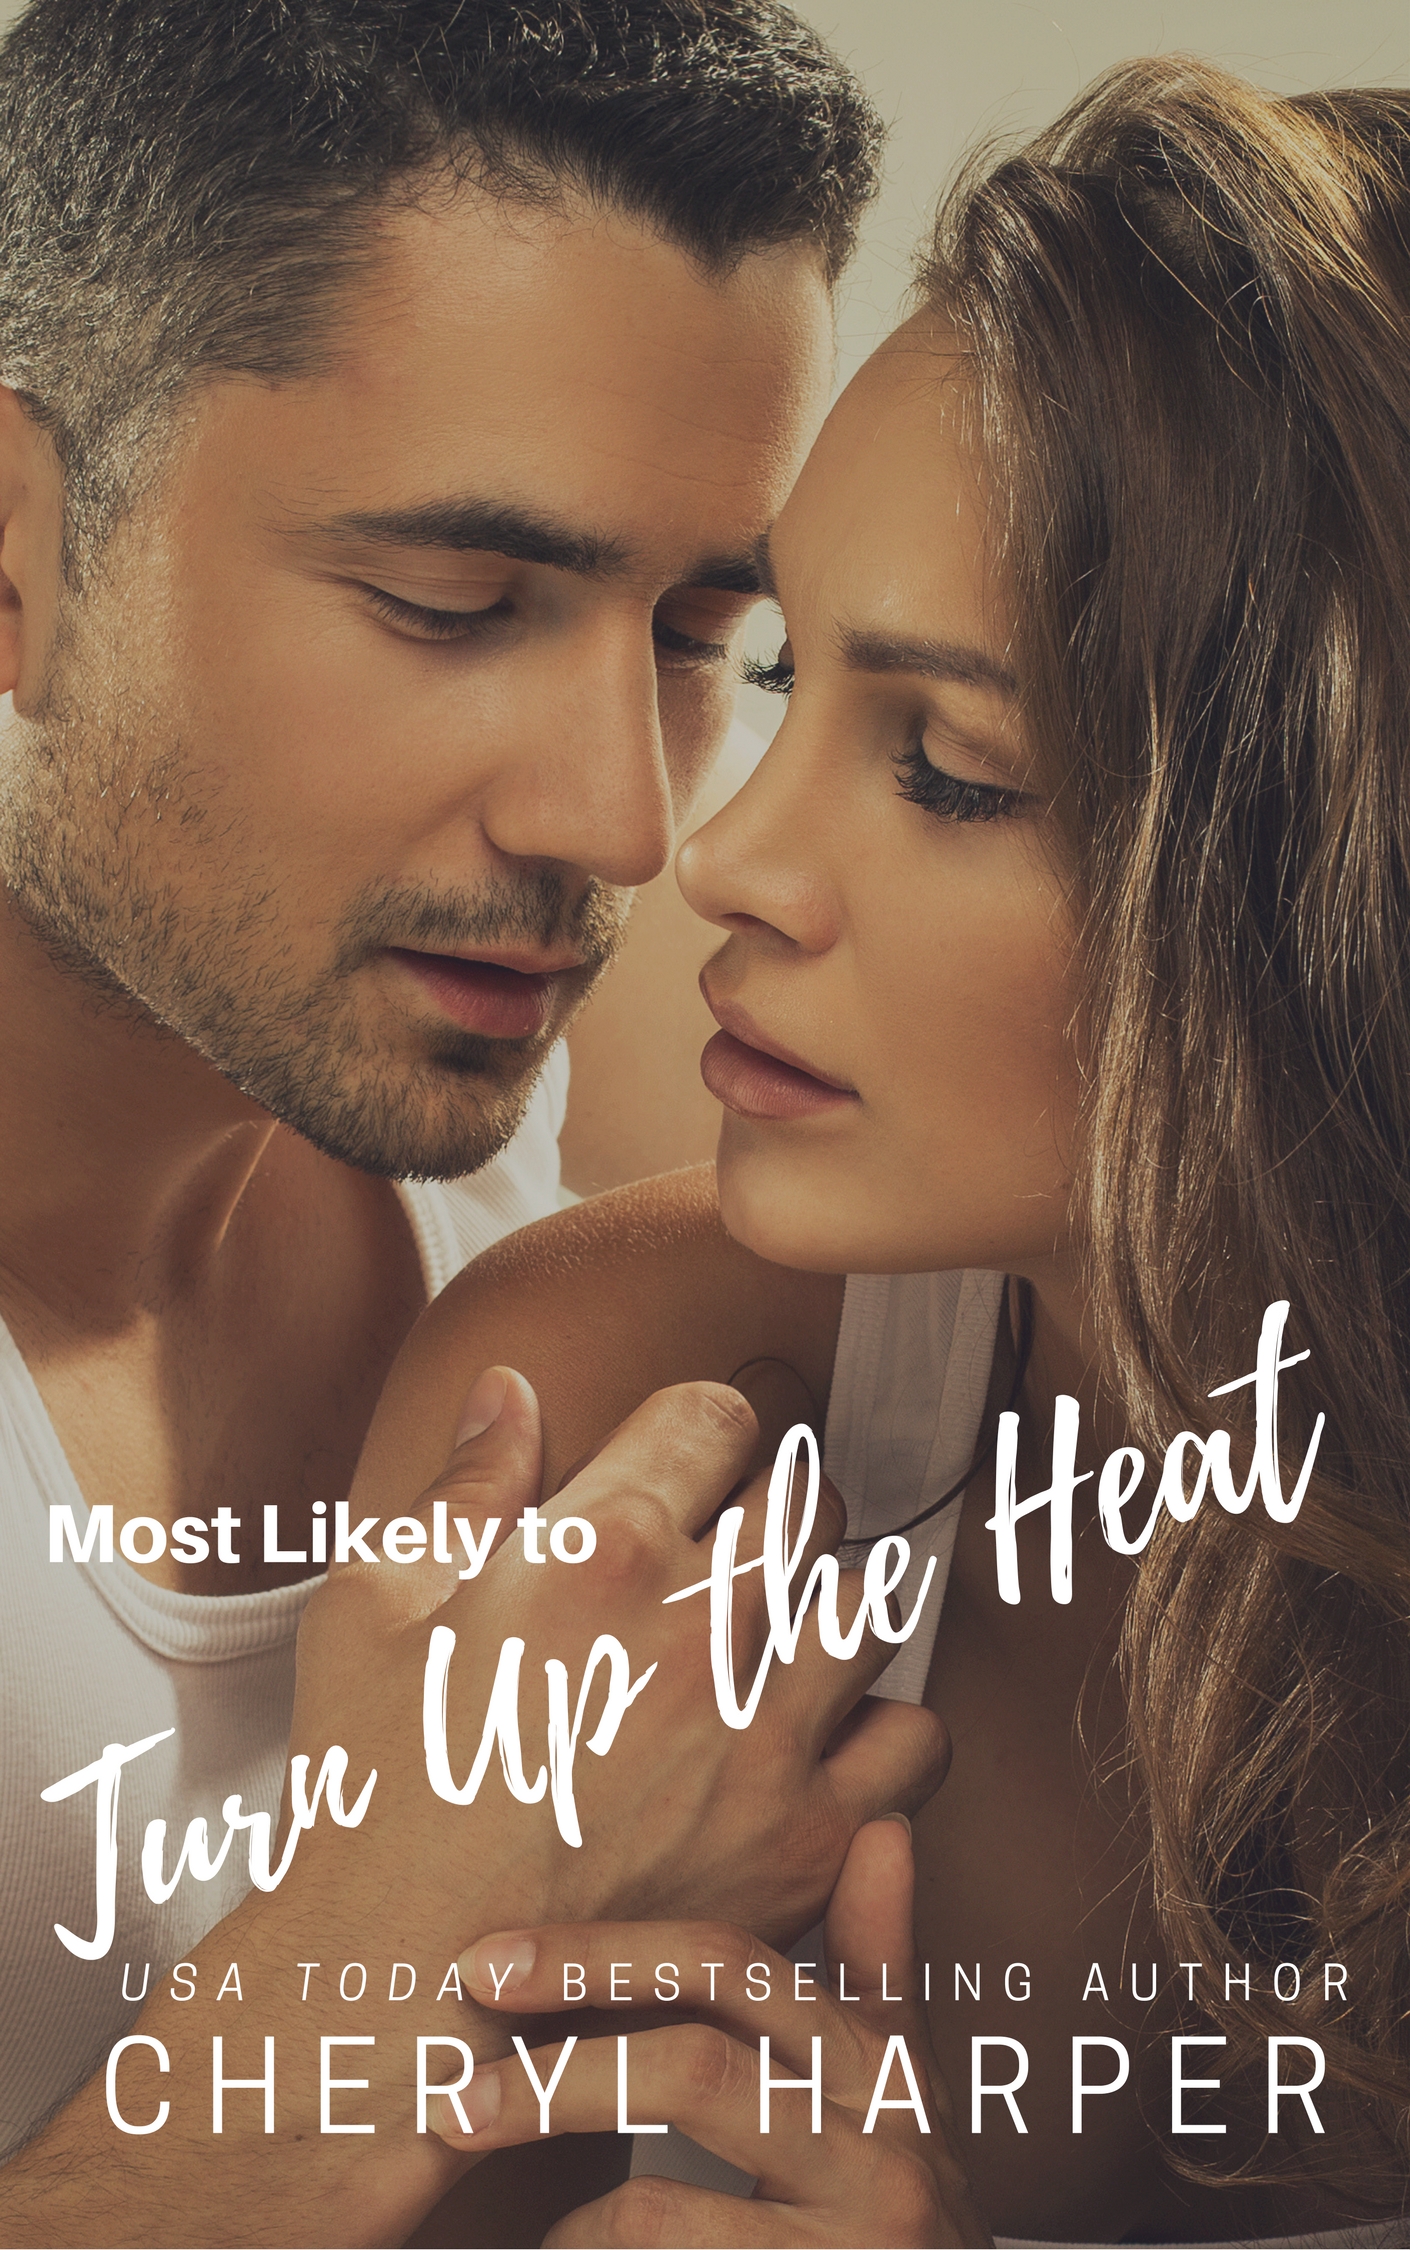 FREE: Most Likely to Turn Up the Heat by Cheryl Harper